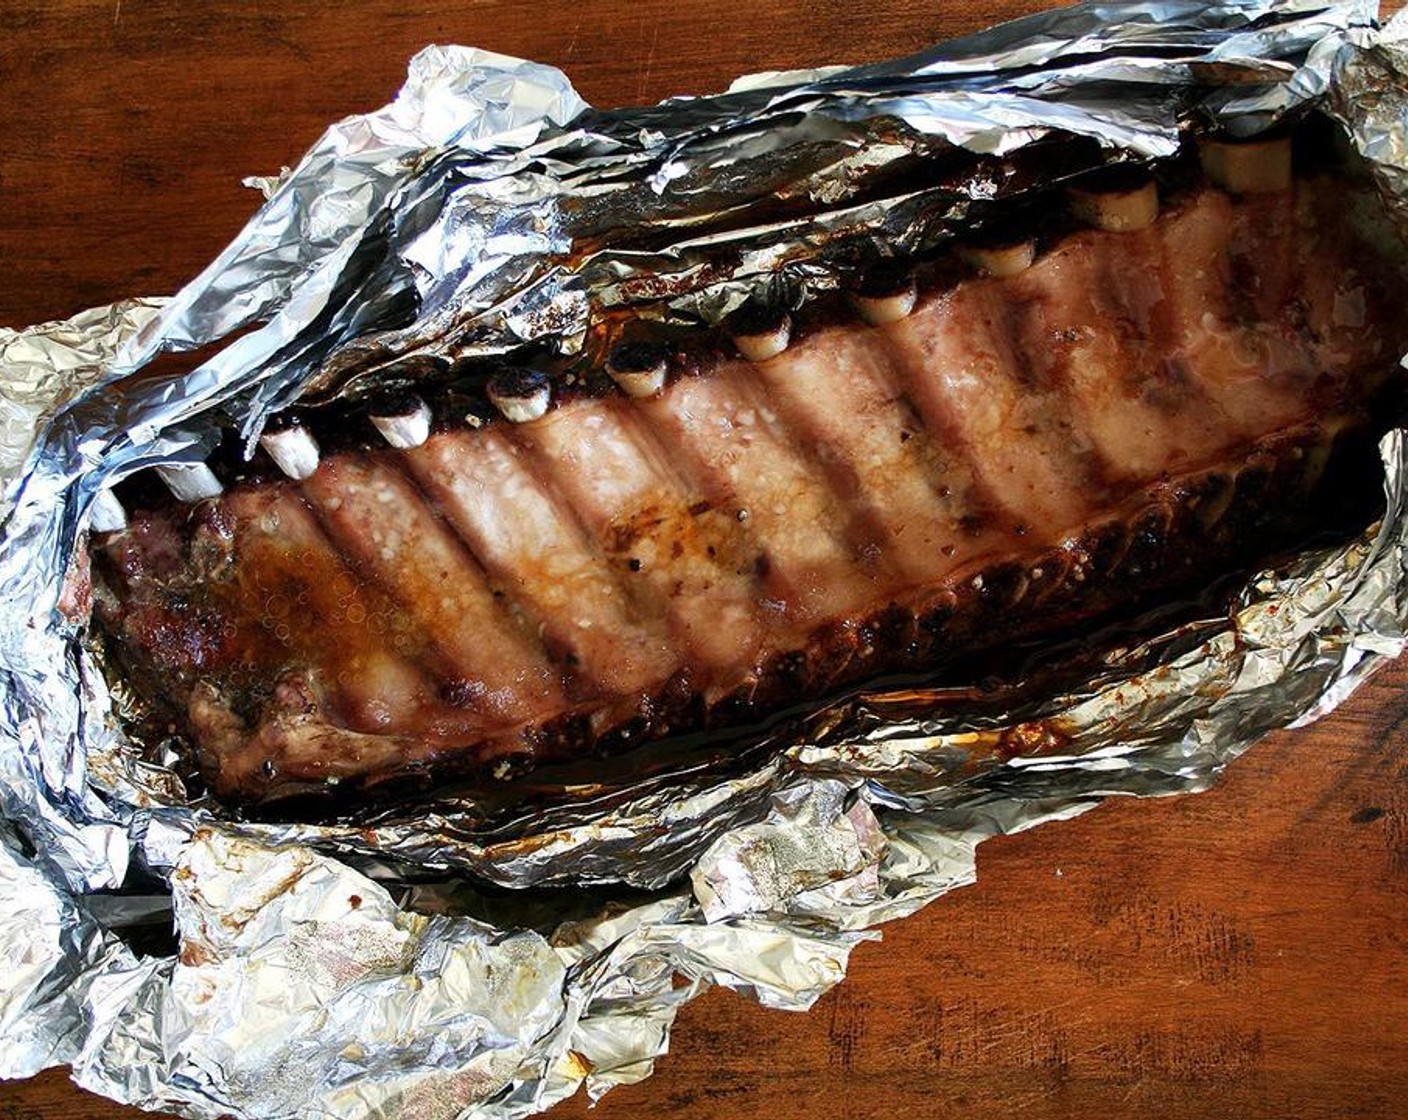 step 6 When ready to serve, reheat the ribs in the oven for about 15 minutes at 350 degrees F (180 degrees C). This is assuming the ribs have not been refrigerated. Or, open the pouch, baste the ribs with the juices and place them under the broiler for five minutes.